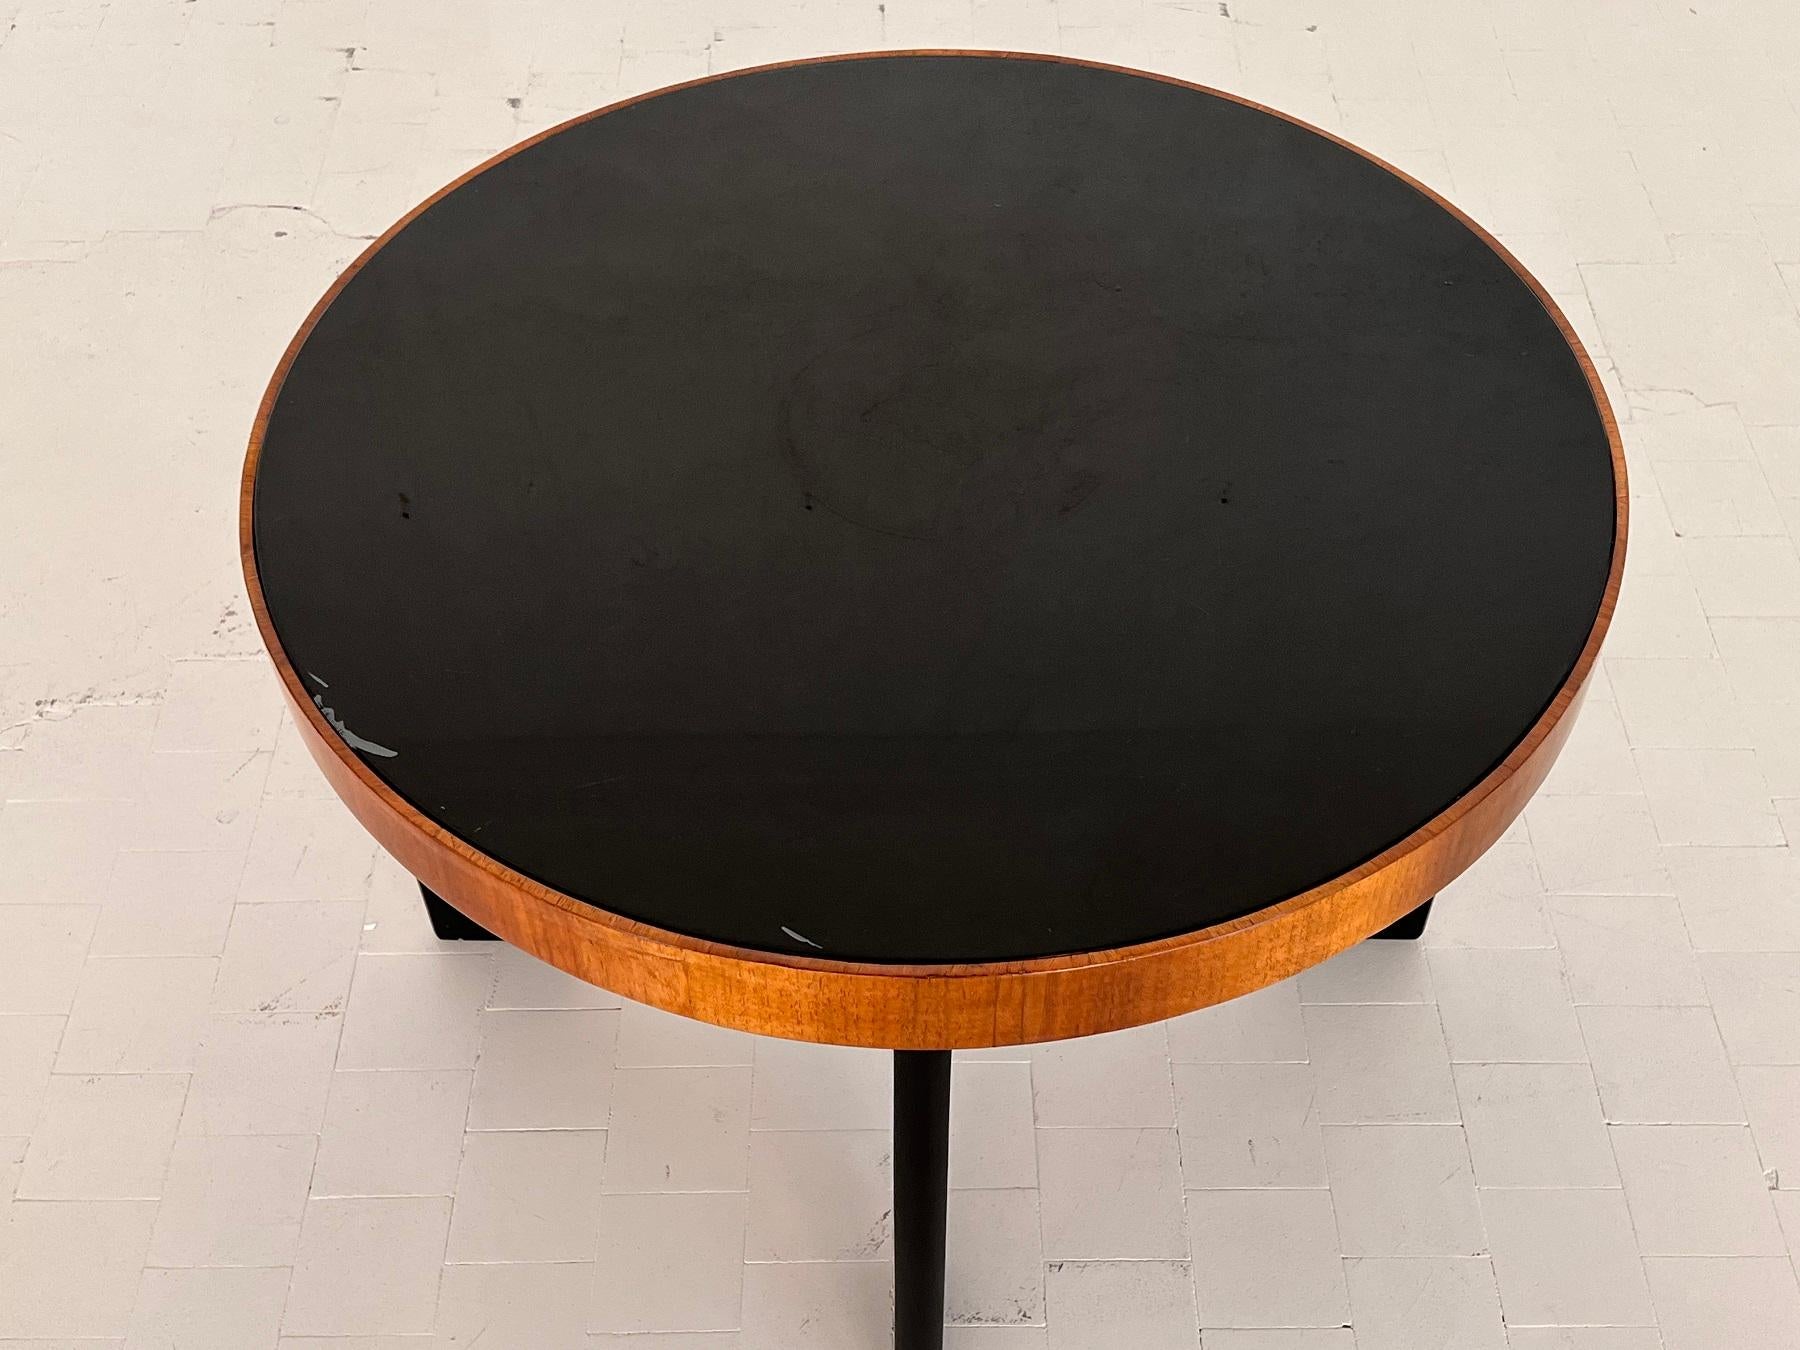 Italian Art Deco Style Coffee Table in Wood with Glass Top, 1970s For Sale 5